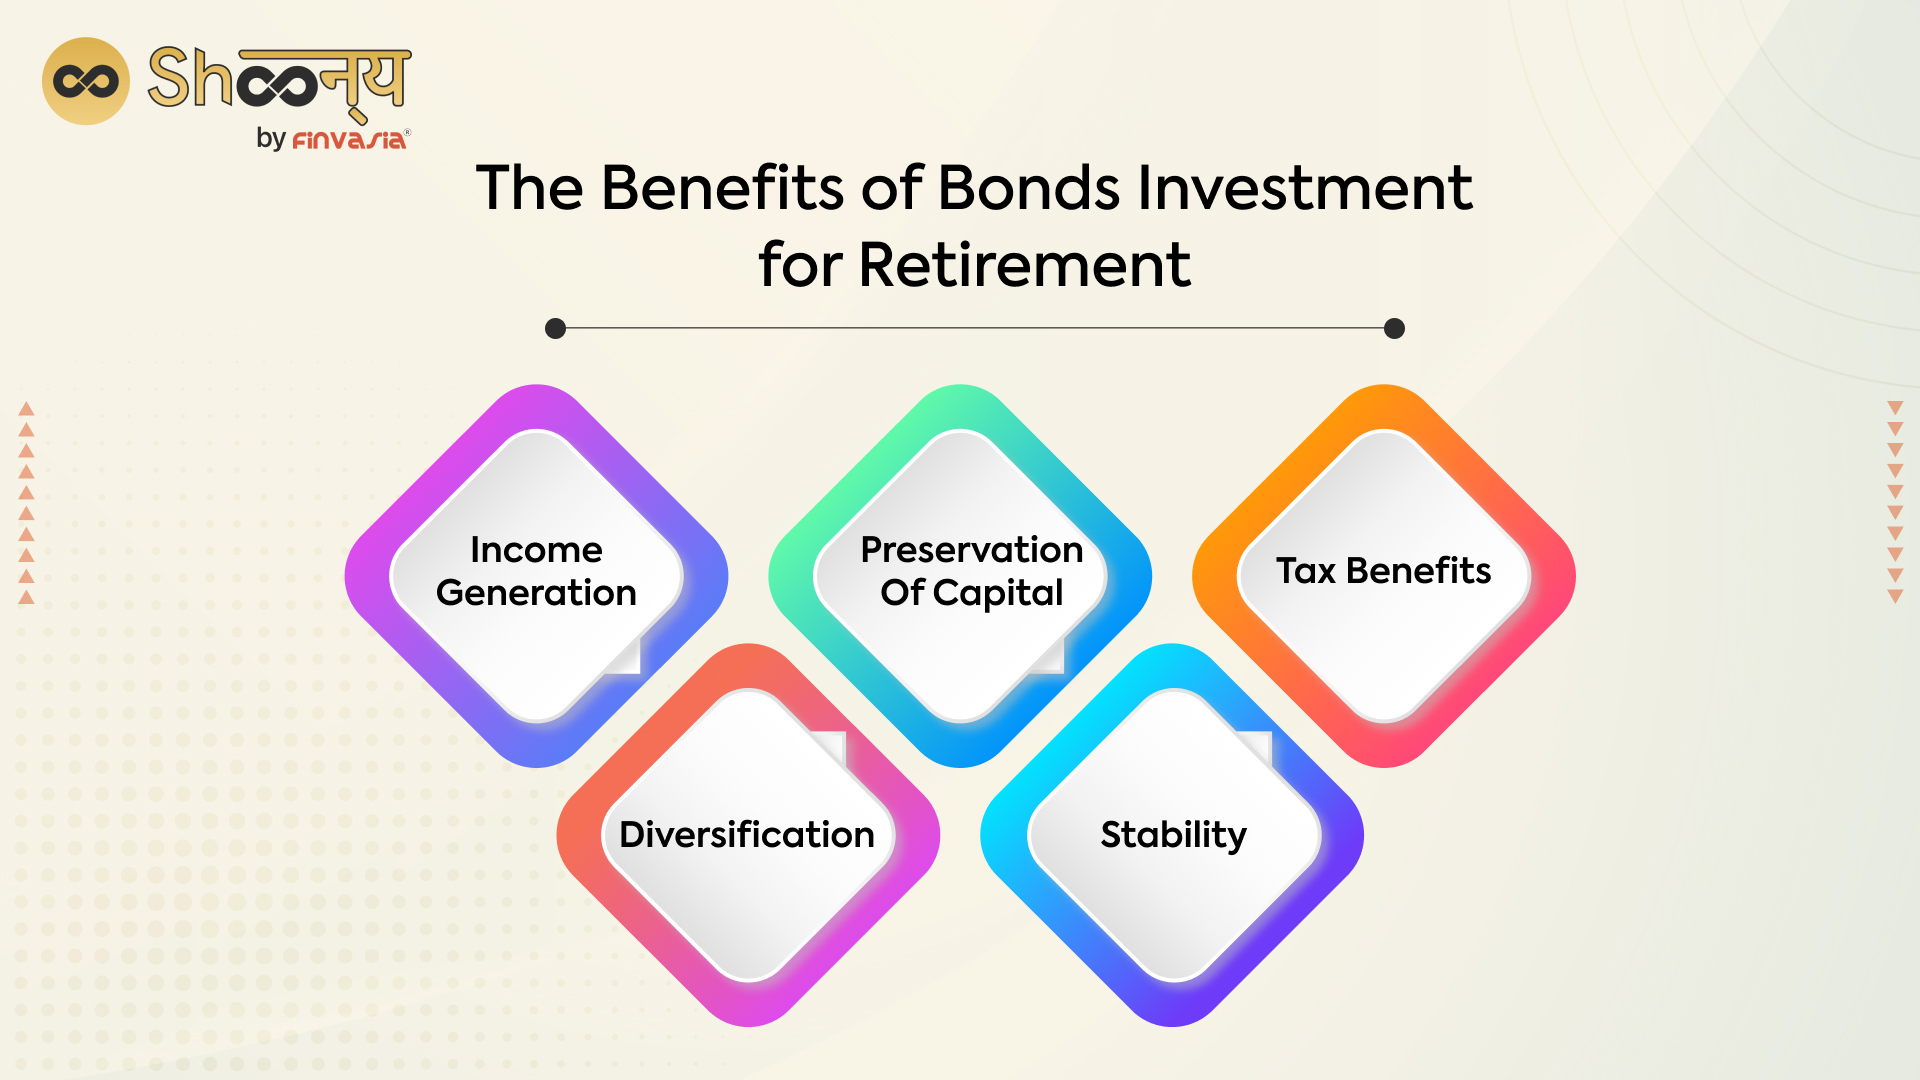 The Benefits of Bonds Investment for Retirement